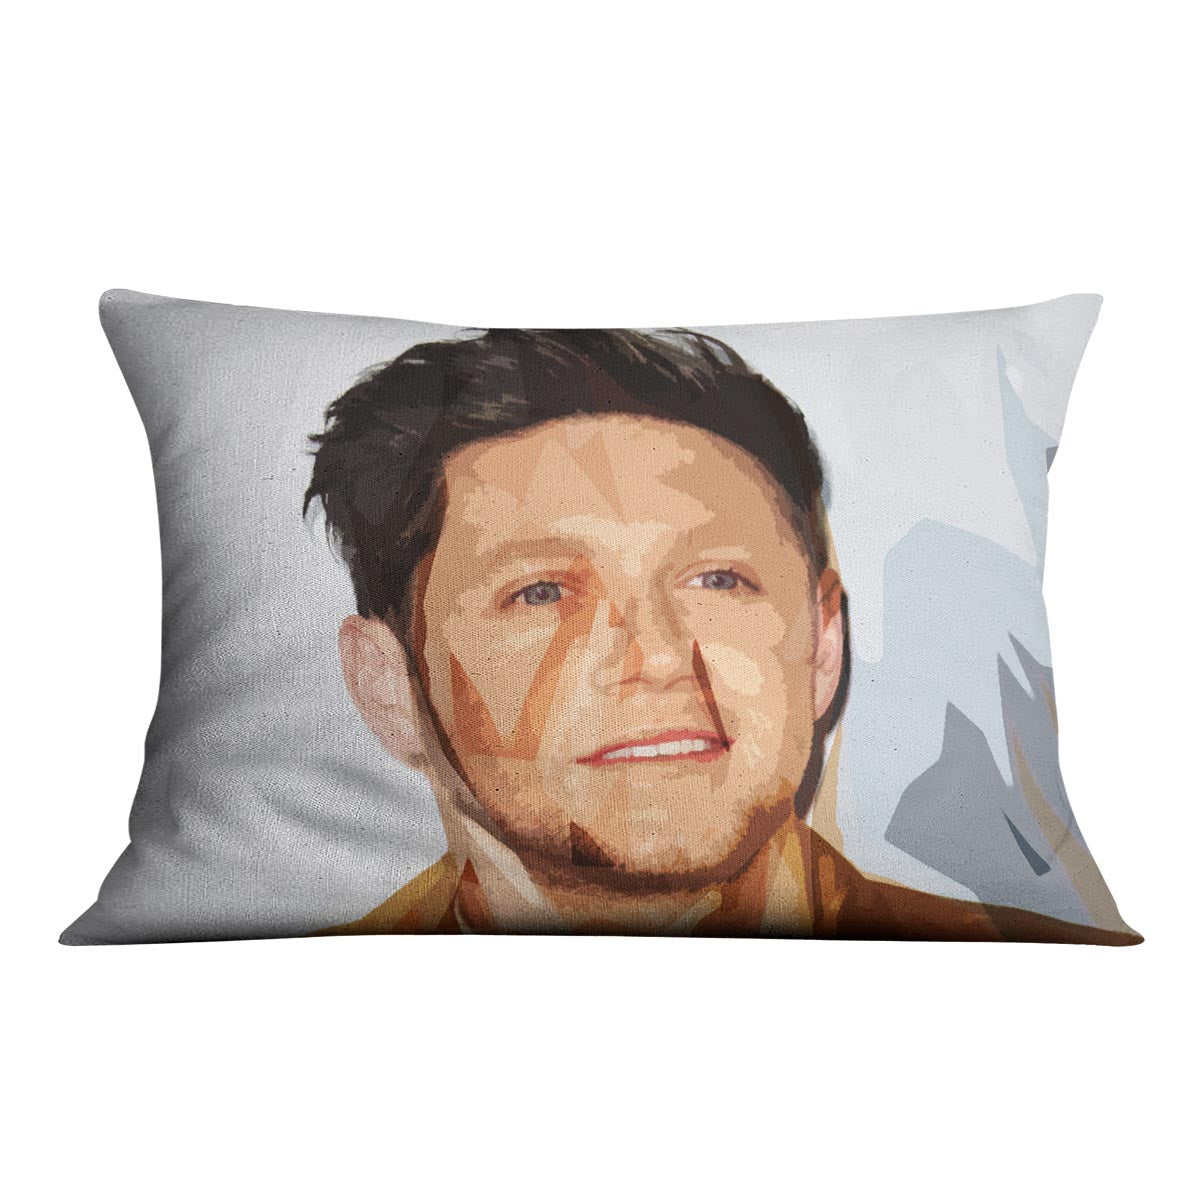 Niall Horan of One Direction Pop Art Cushion